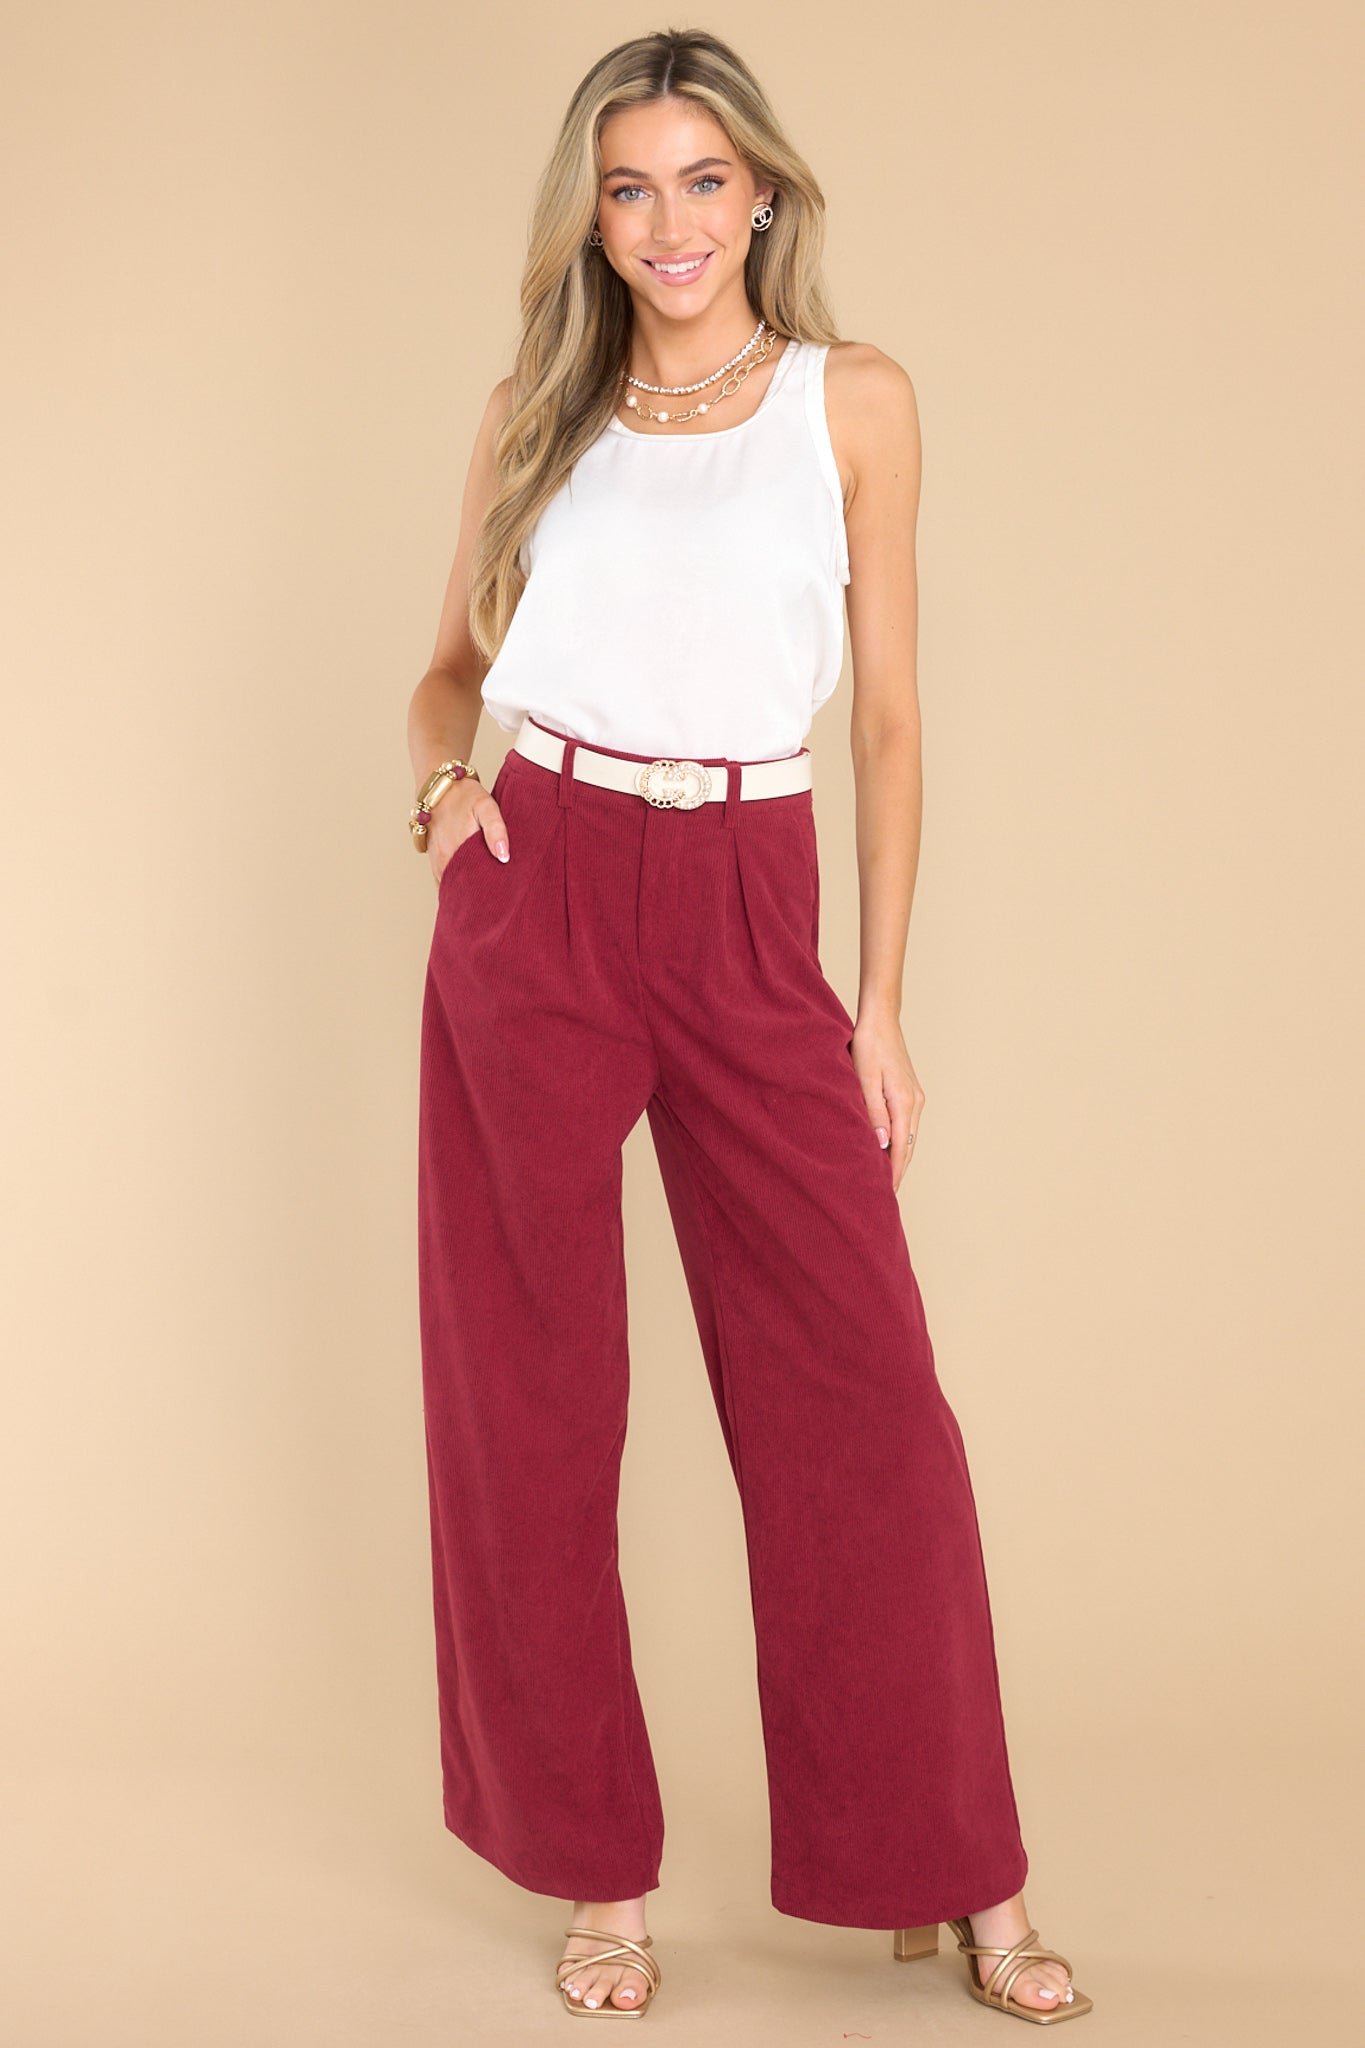 Full body view of these pants that feature a corduroy like material with a zipper hook and eye closure, and two front functional pockets.